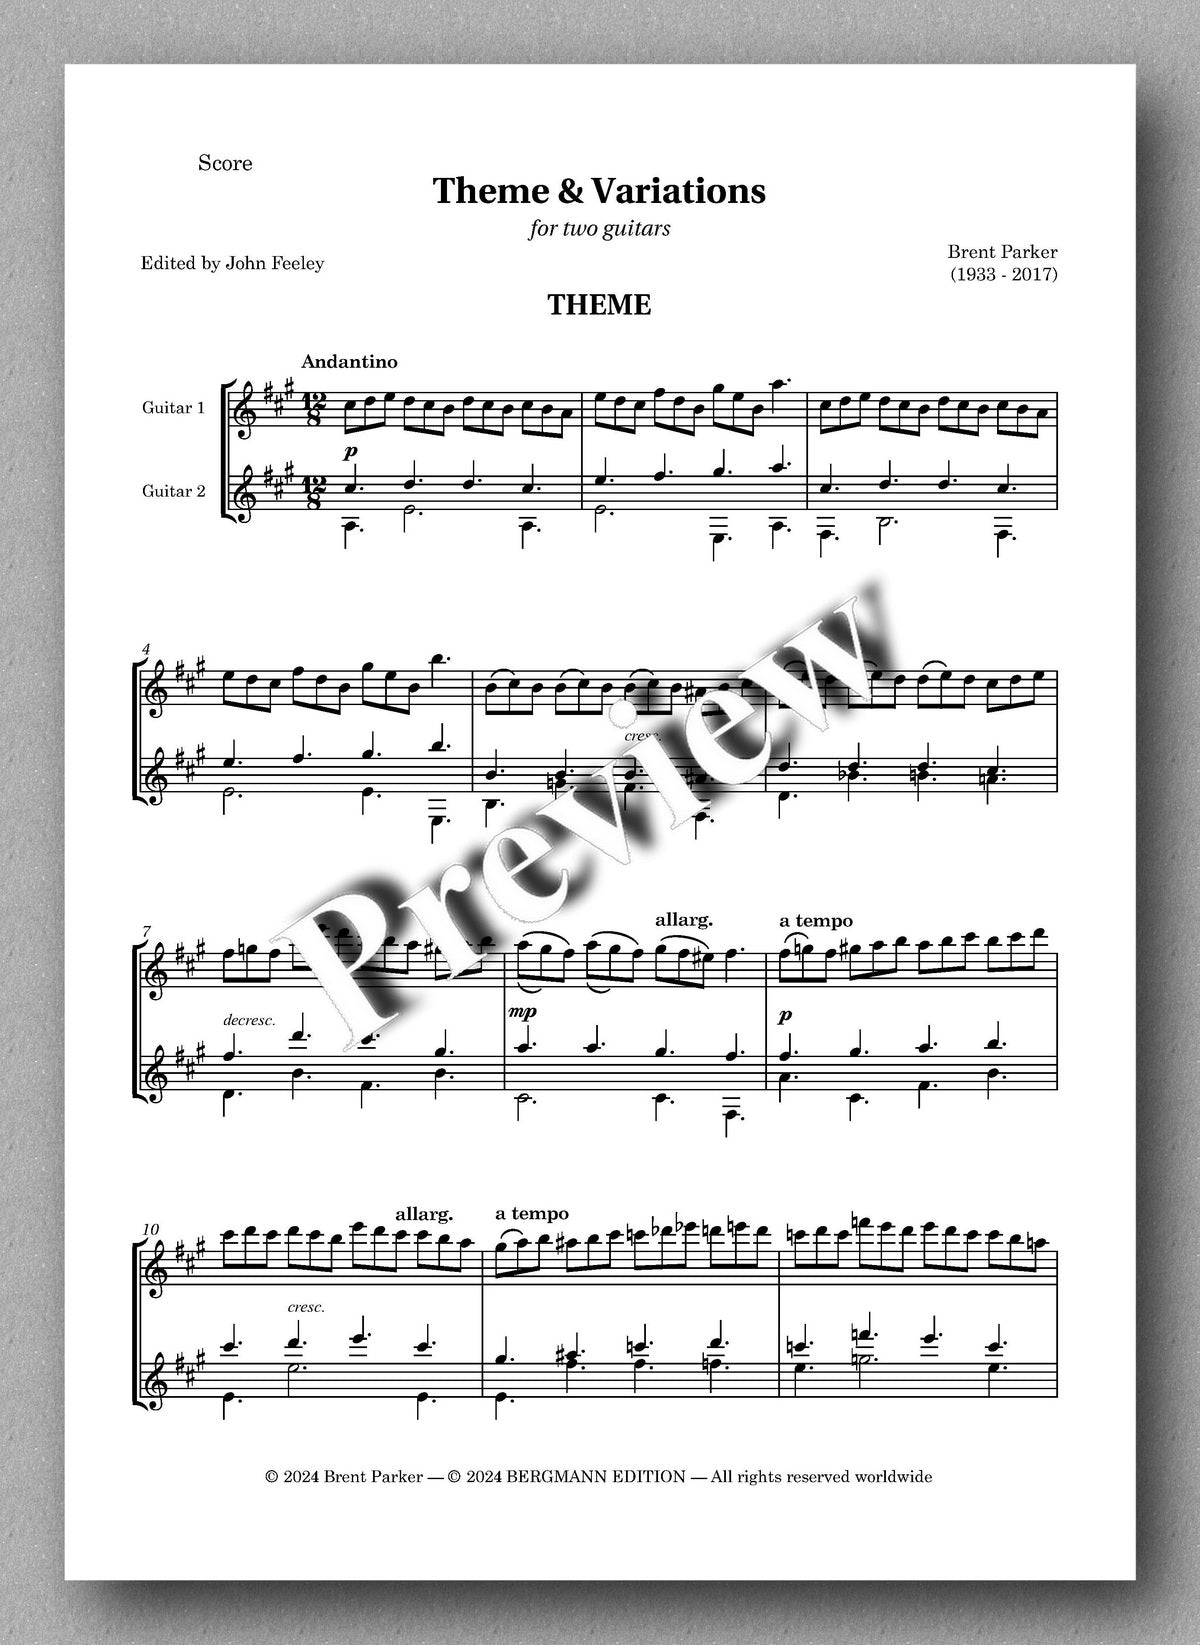 Theme & Variations by Brent Parker - preview of the music score 1